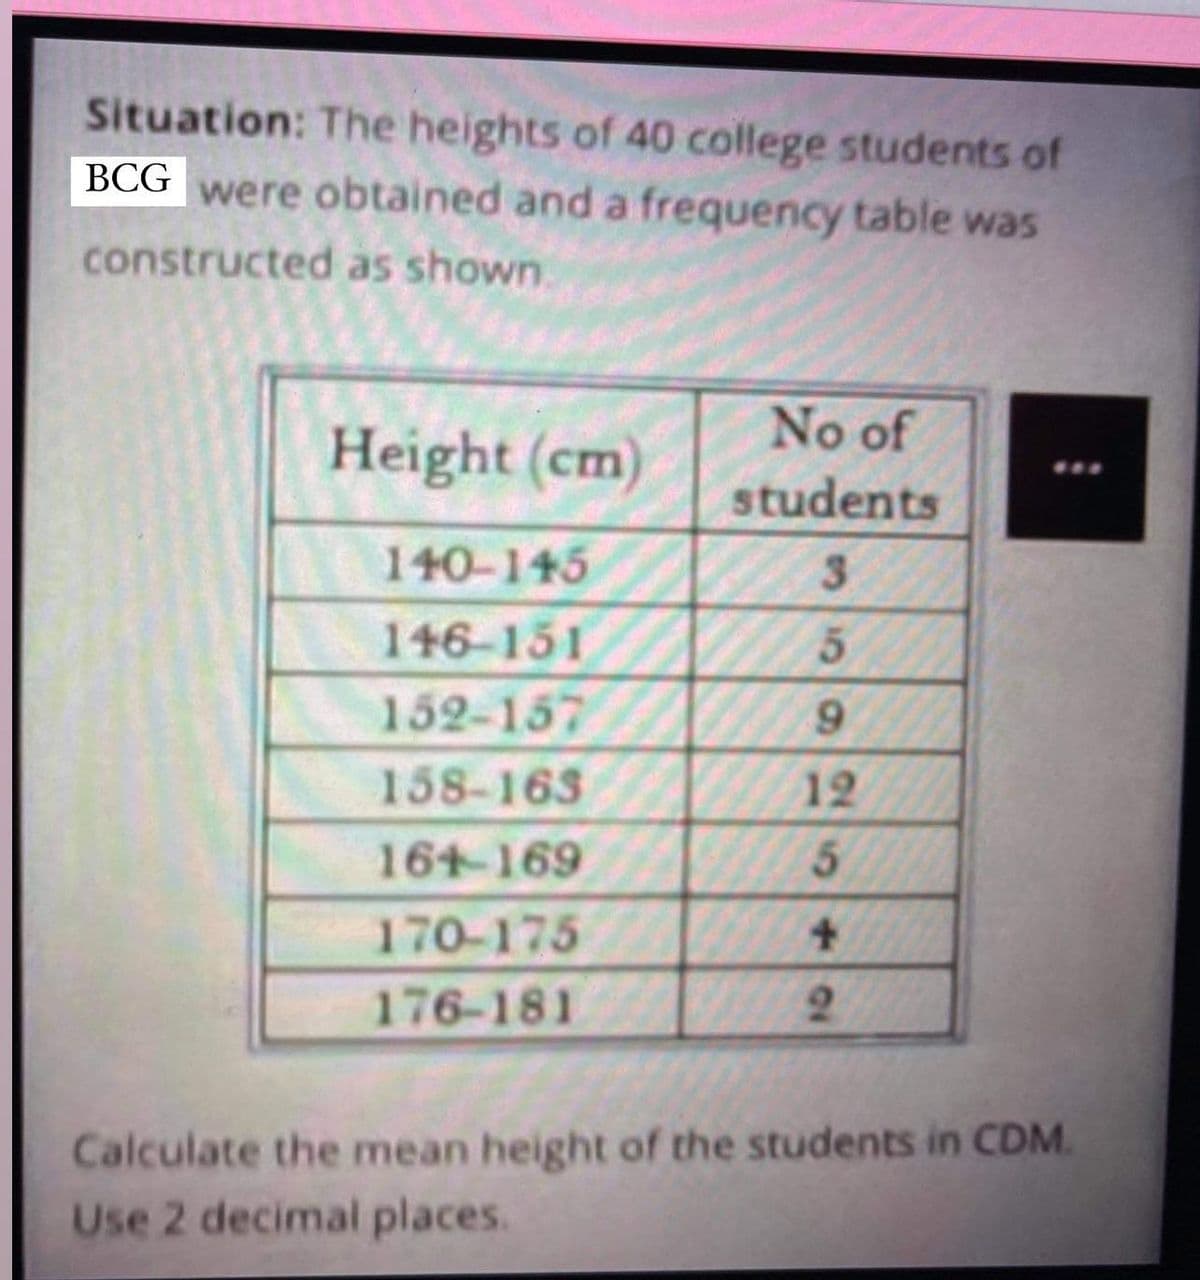 Situation: The heights of 40 college students of
ВCG
were obtained and a frequency table was
constructed as shown.
No of
Height (cm)
students
140-145
3.
146-151
5.
152-157
9.
158-163
12
164-169
5.
170-175
176-181
2.
Calculate the mean height of the students in CDM.
Use 2 decimal places.
